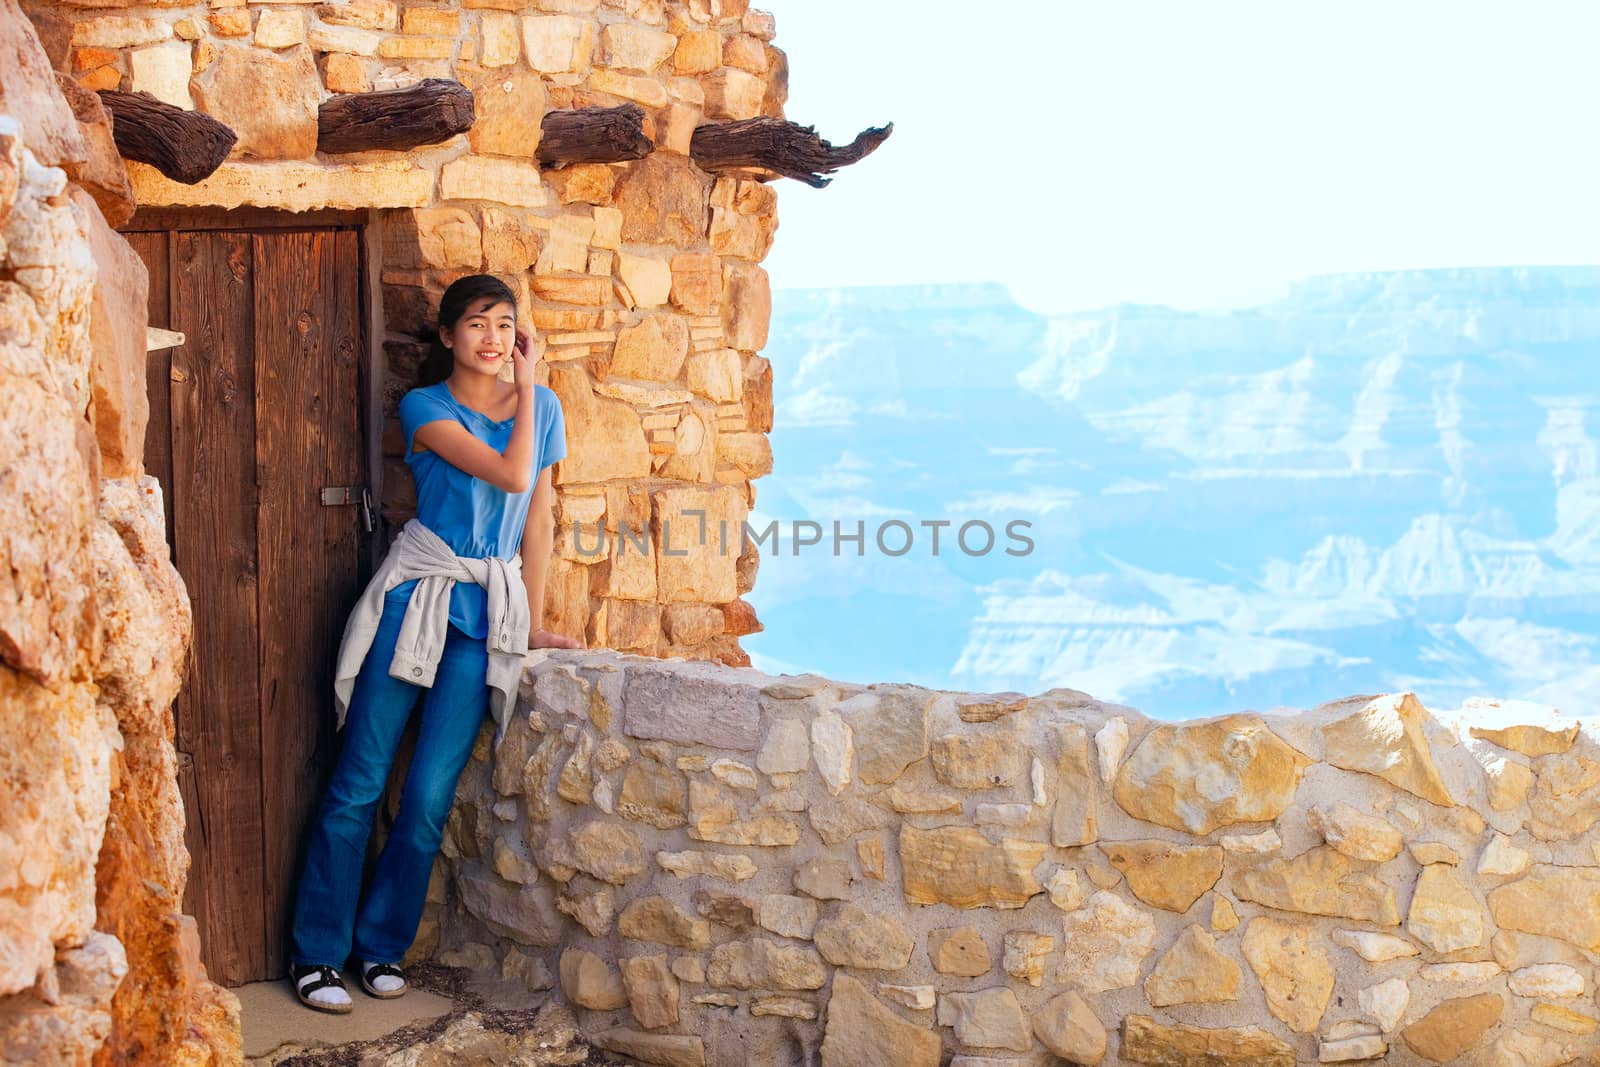 Biracial teen girl relaxing, leaning against rock wall overlooking Grand Canyon, next to doorway